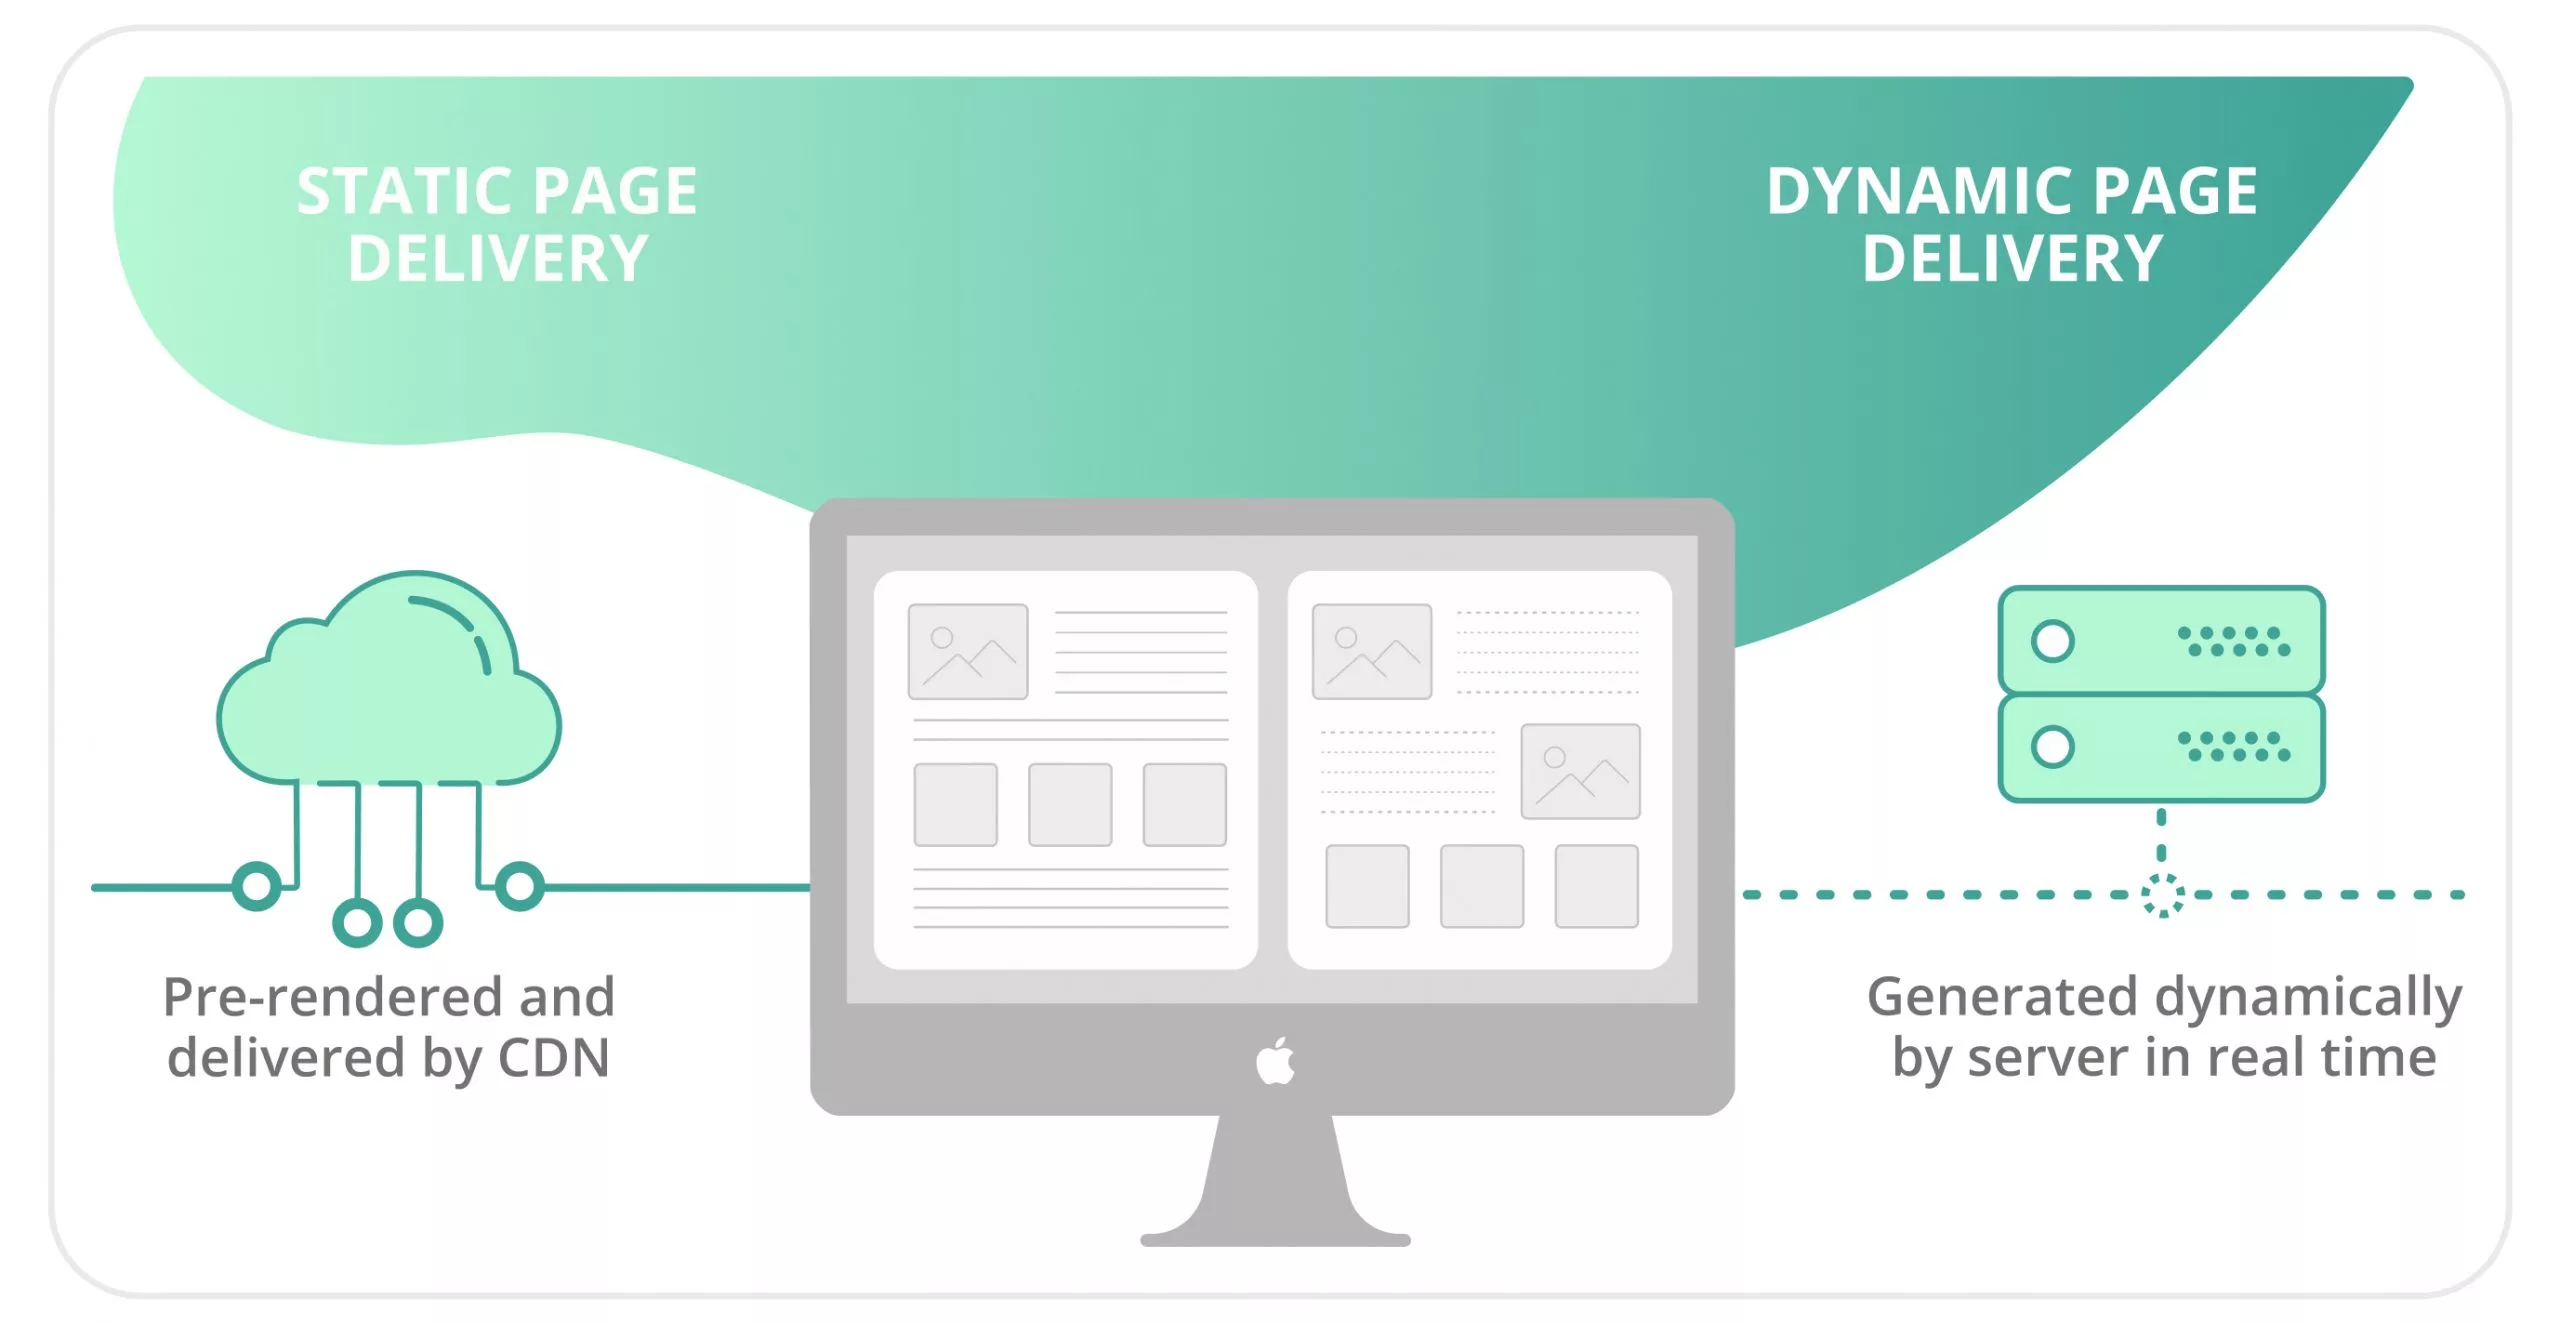 Both static and dynamic content can be delivered through a Content Delivery Network